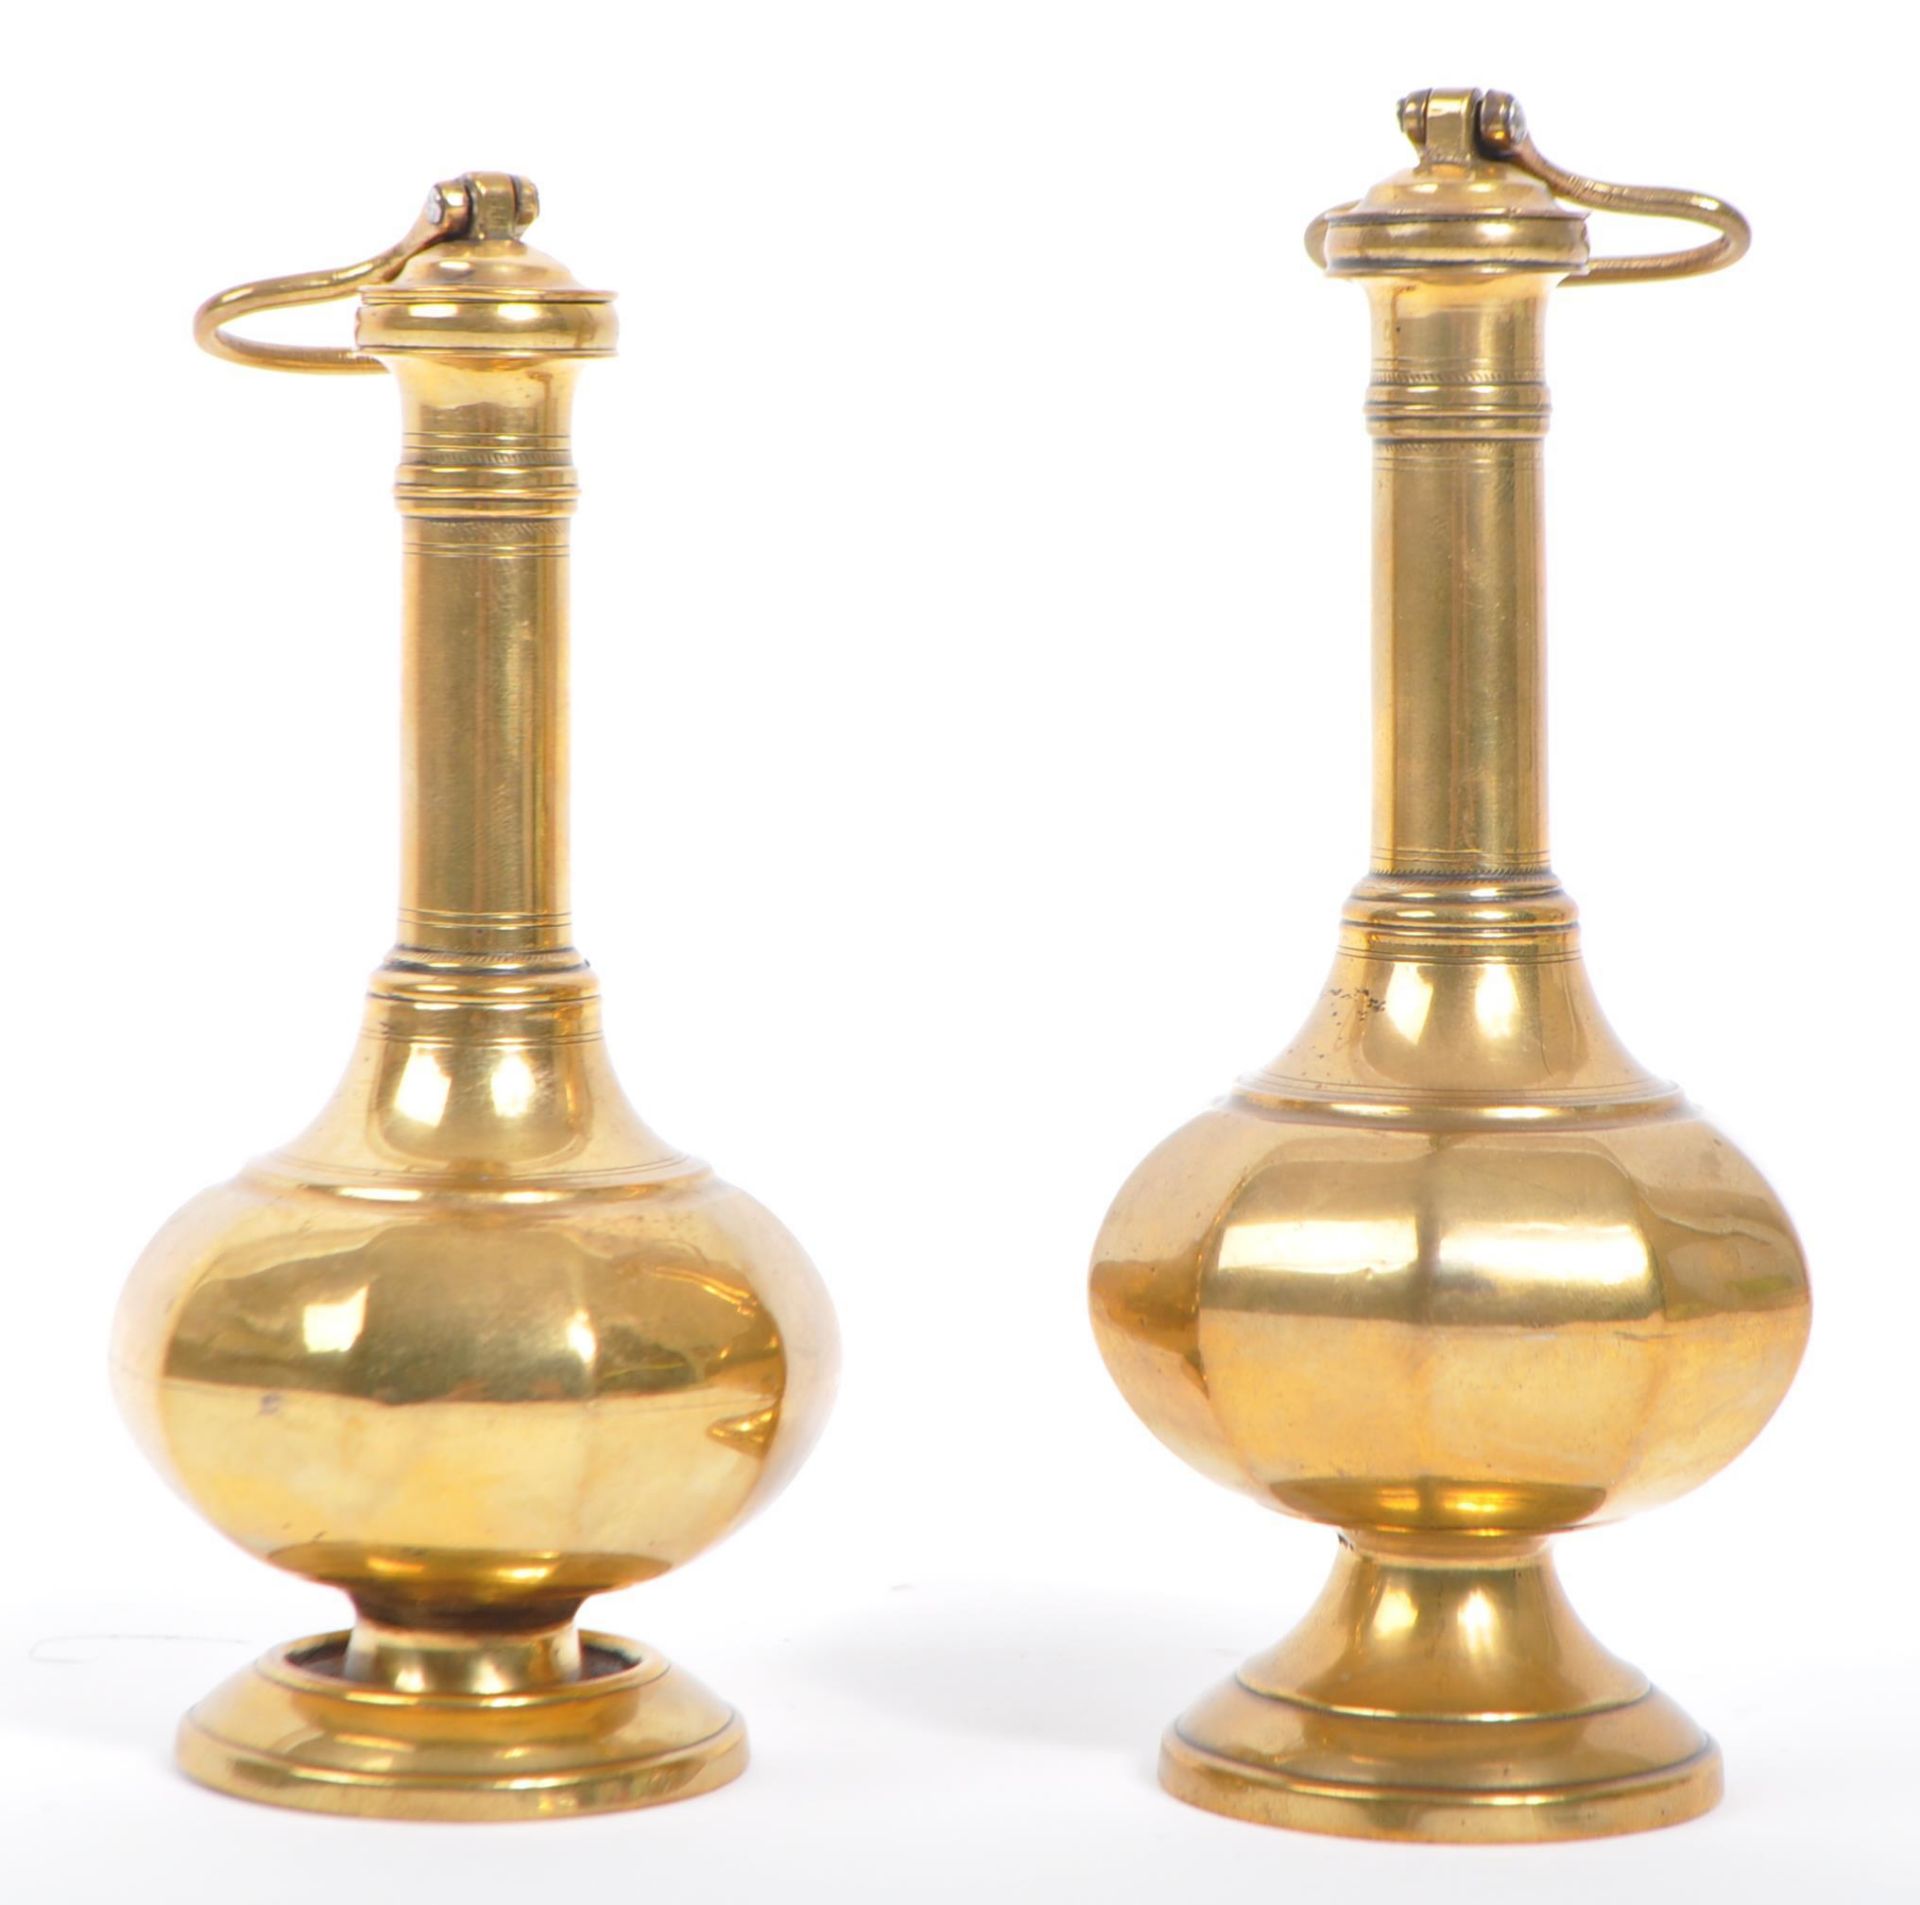 PAIR OF EARLY 20TH CENTURY BRASS ROSE WATER SHAKERS